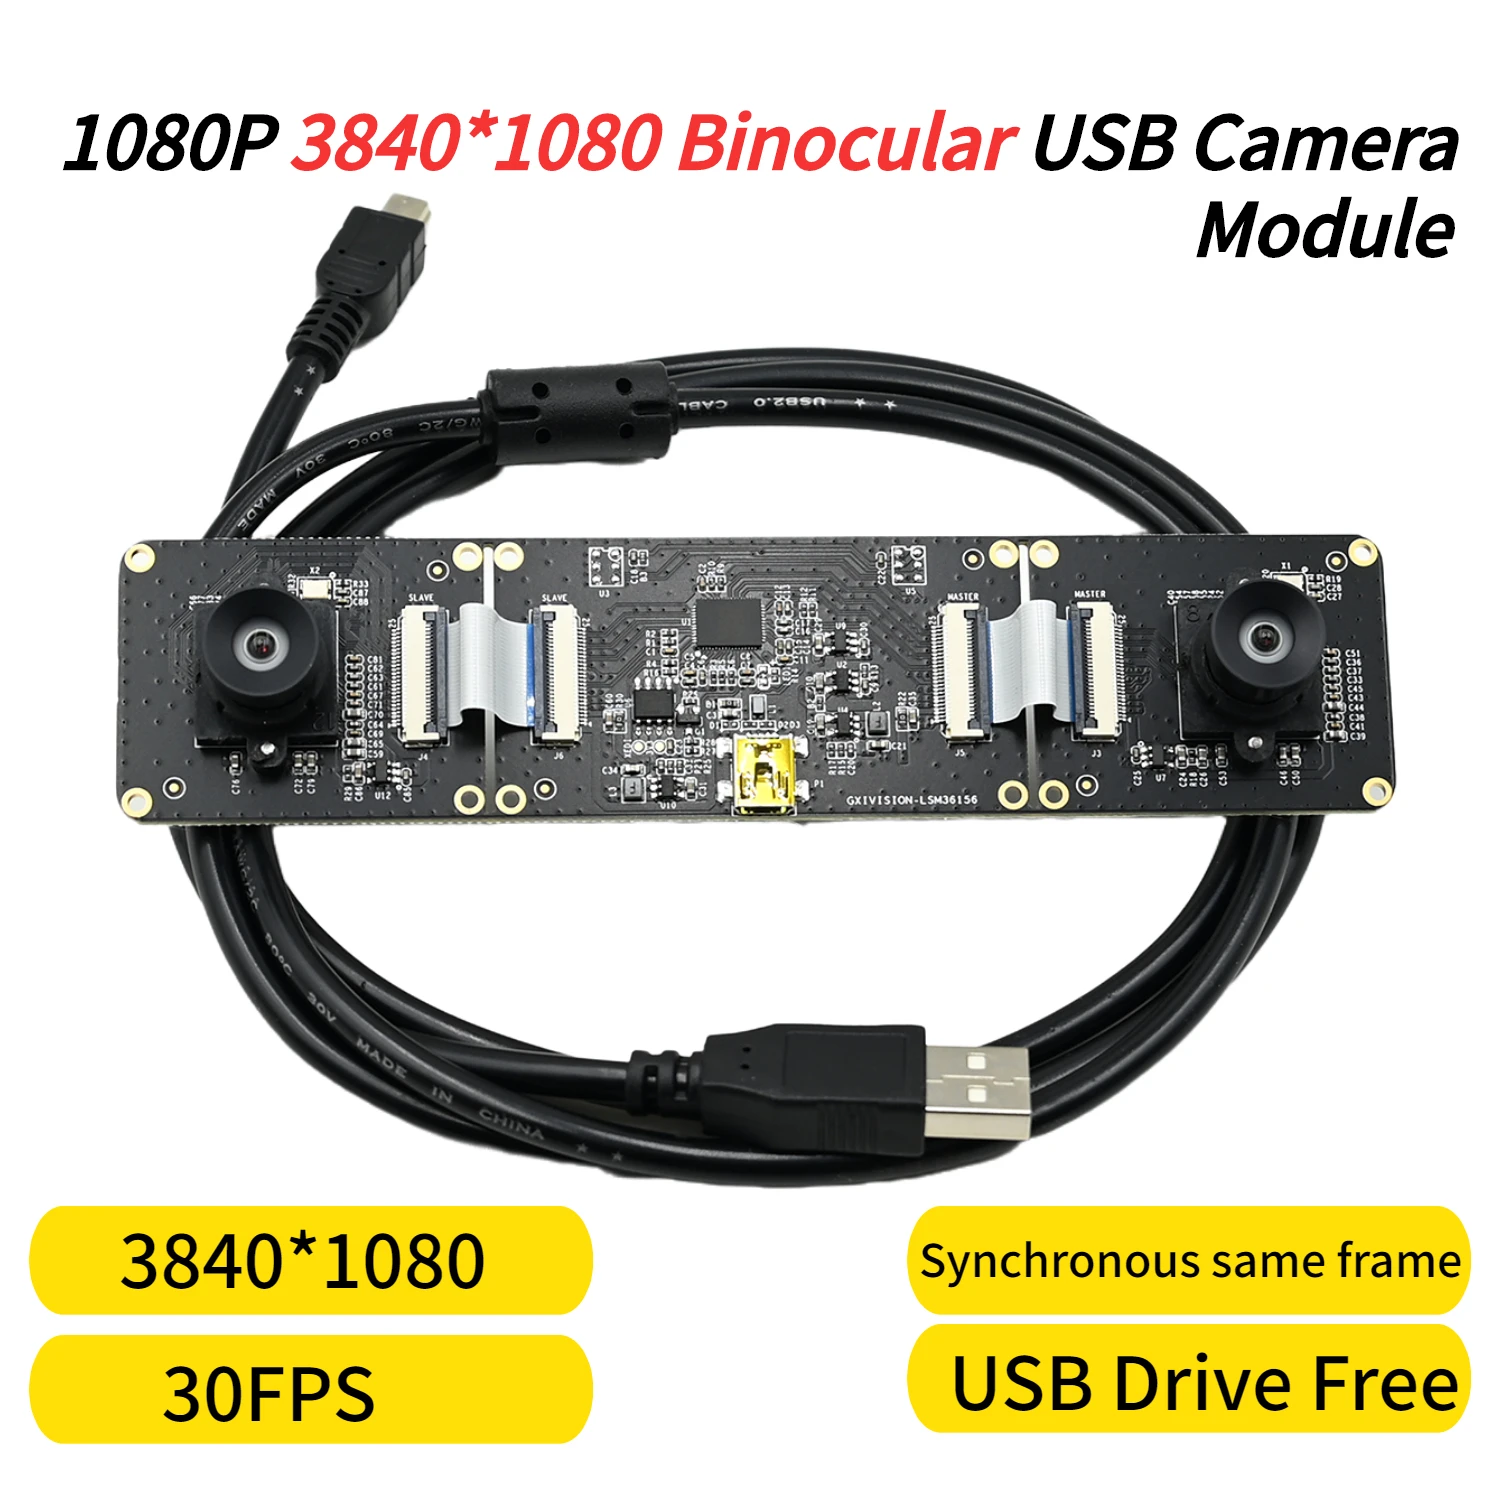 3D Camera Module Dual Lens 1080P 2MP,Synchronous Same Frame, IMX307 USB Drive Free, For Modeling Face Recognition Binocular Rang